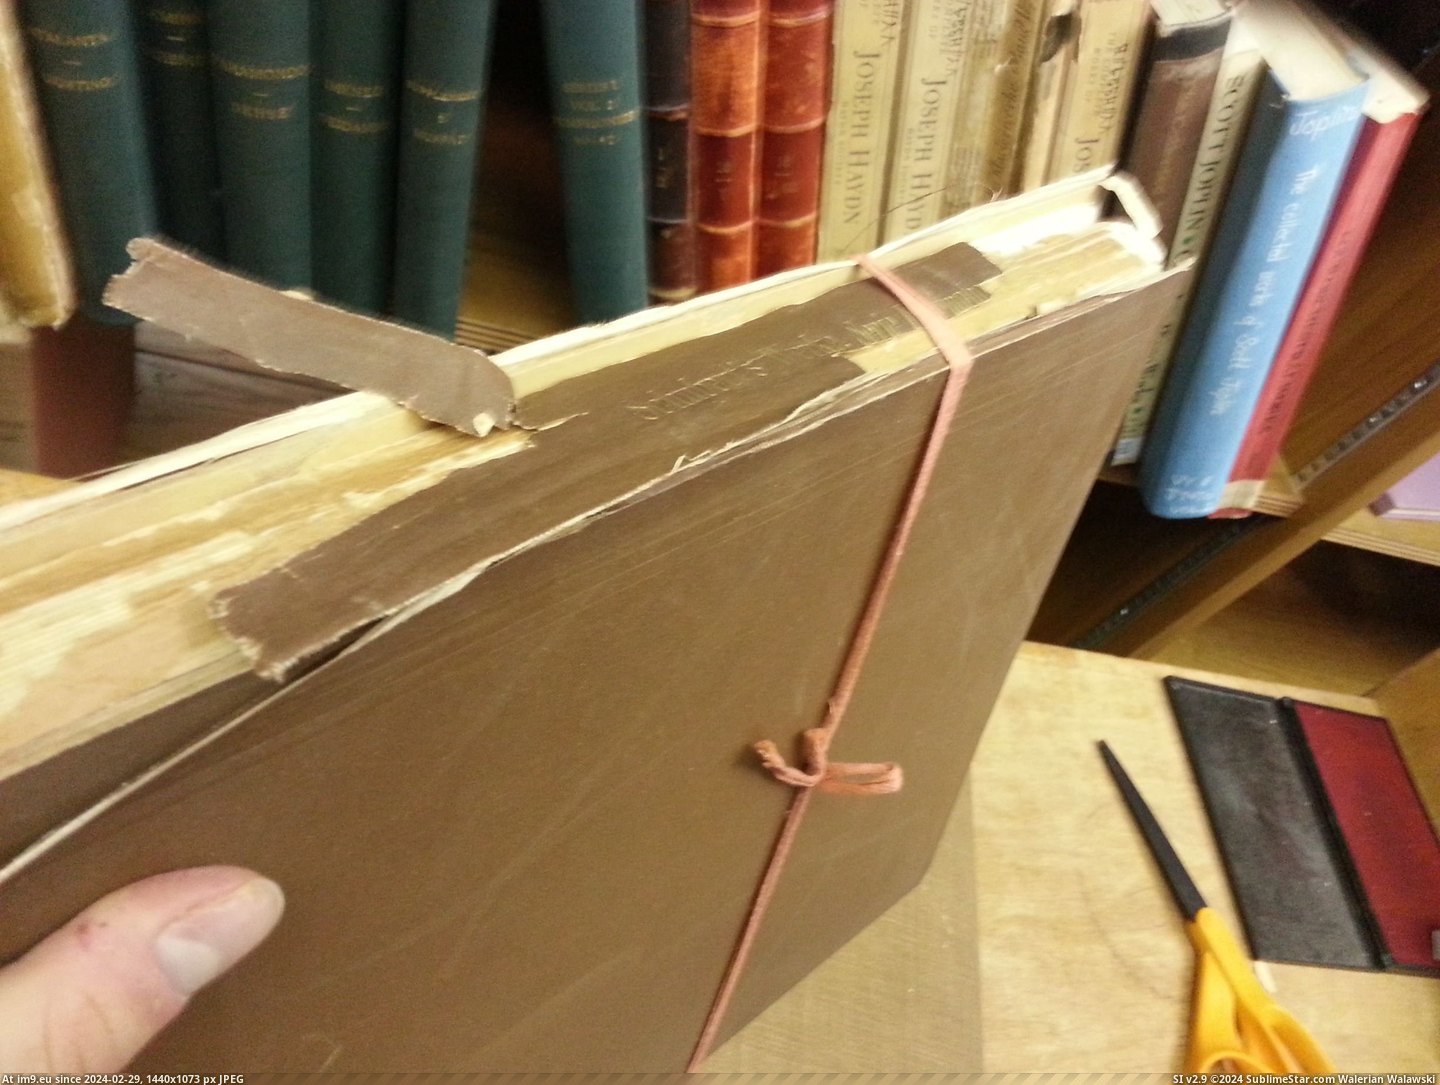 #Old #Work #Longer #Destroy #Usable #Library #Books #Falling [Mildlyinteresting] I work at a library, and I had to destroy some old books that were no longer usable-falling apart. I found o Pic. (Image of album My r/MILDLYINTERESTING favs))